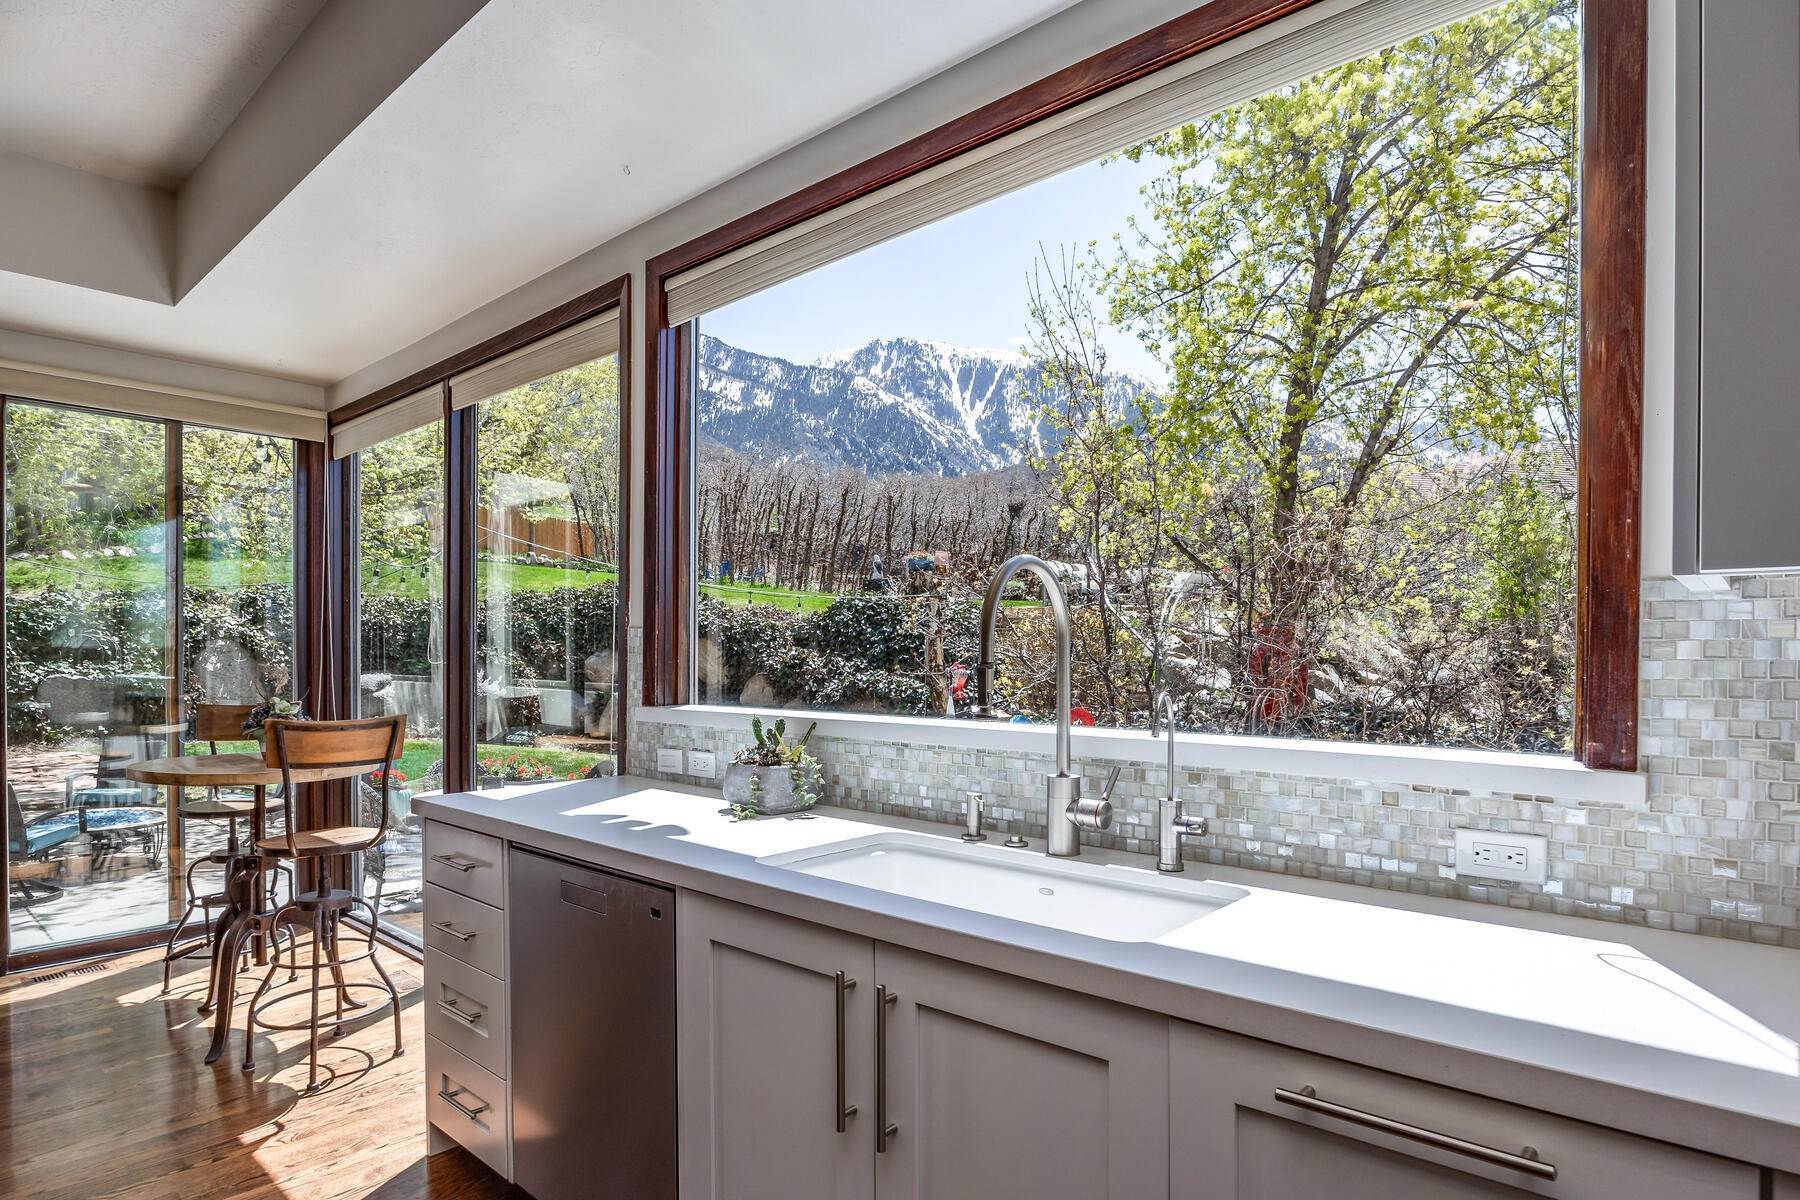 4. Single Family Homes for Sale at Immaculate 2-Story Home Nestled in a Quiet Cul-de-sac 3272 Bell Oaks Cir Sandy, Utah 84092 United States